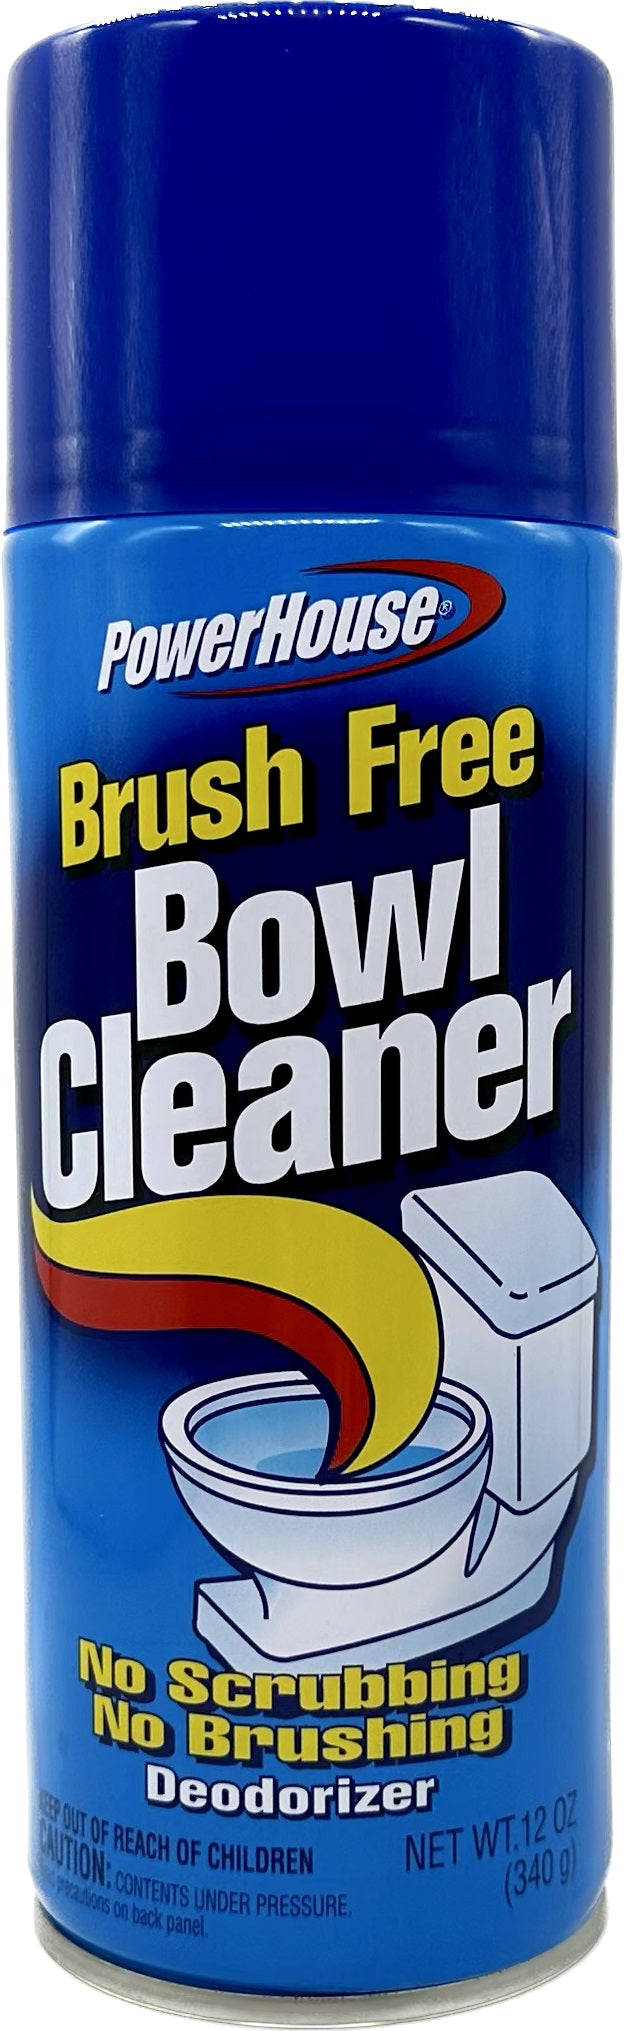 TOILET BOWL CLEANER SAFE CAN